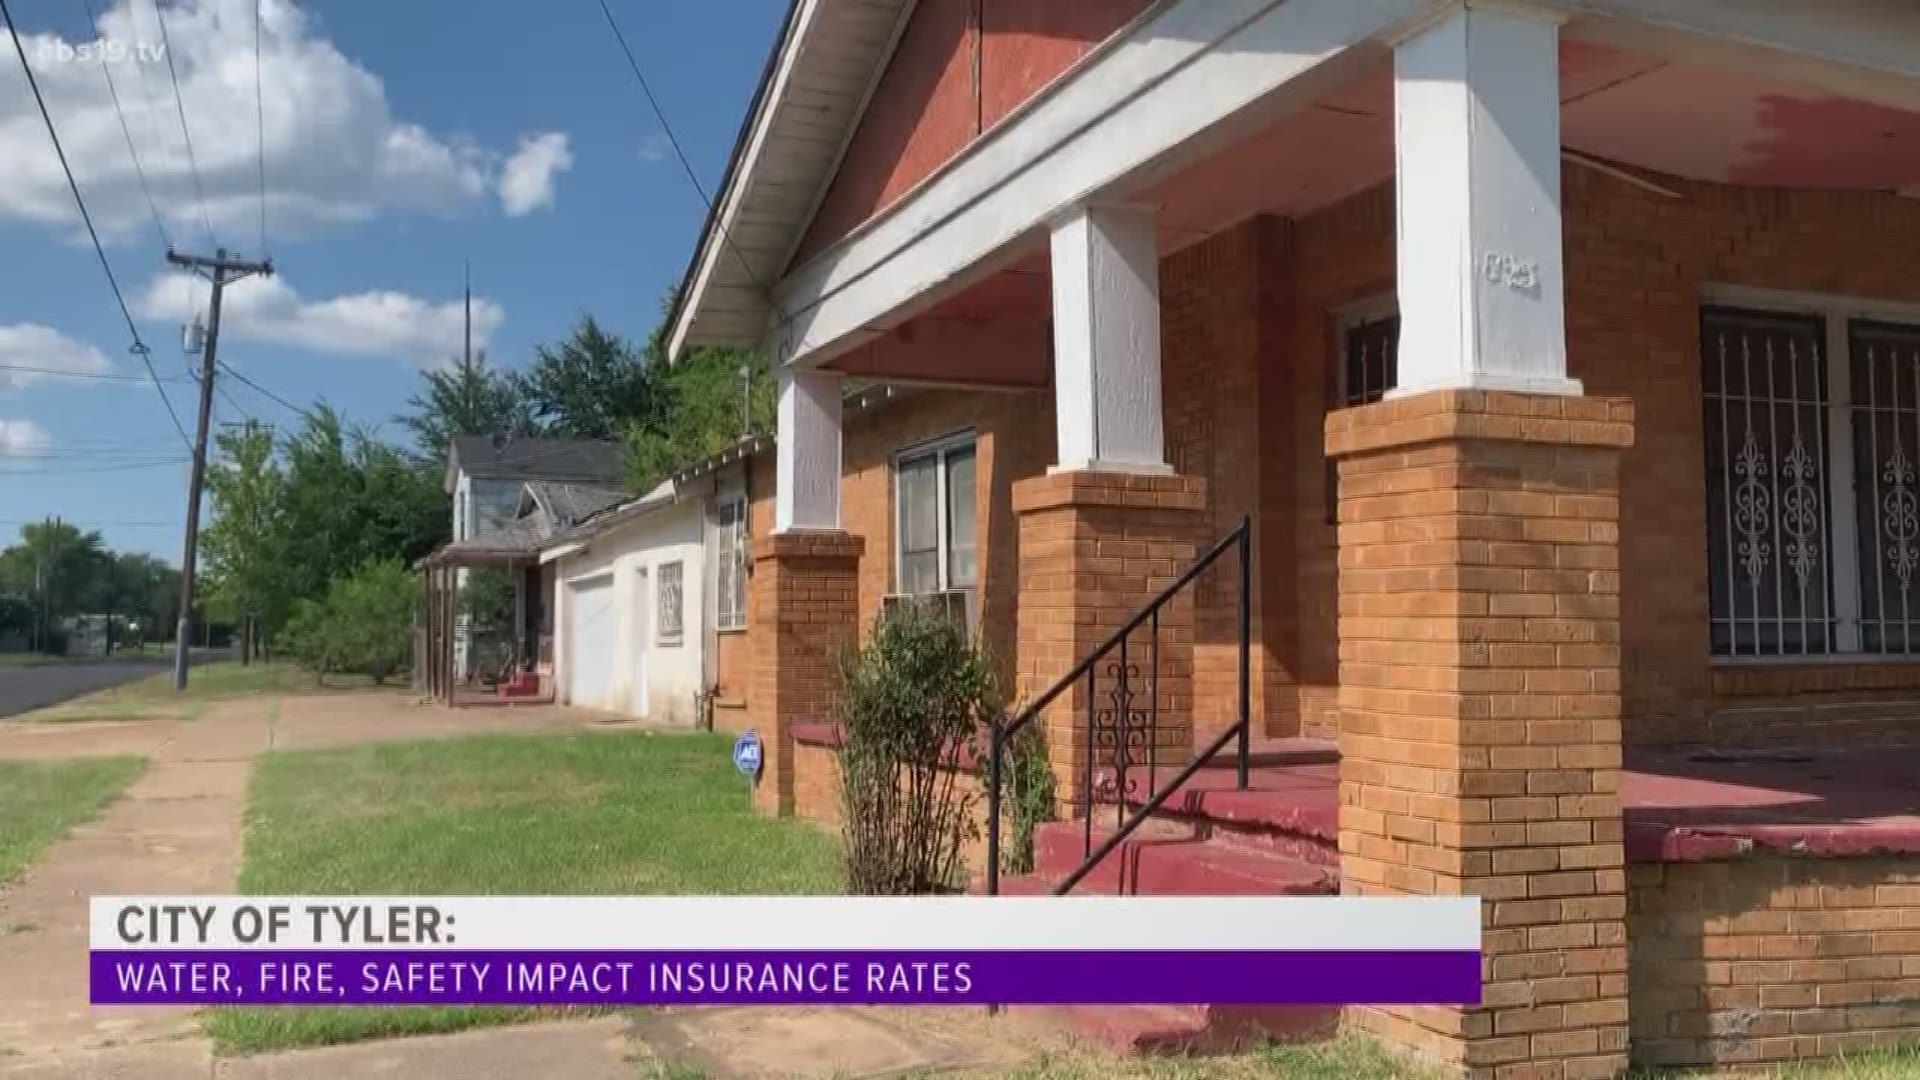 For the last 10 years, the city of Tyler has been ranked a two for its home and business insurance ranking.